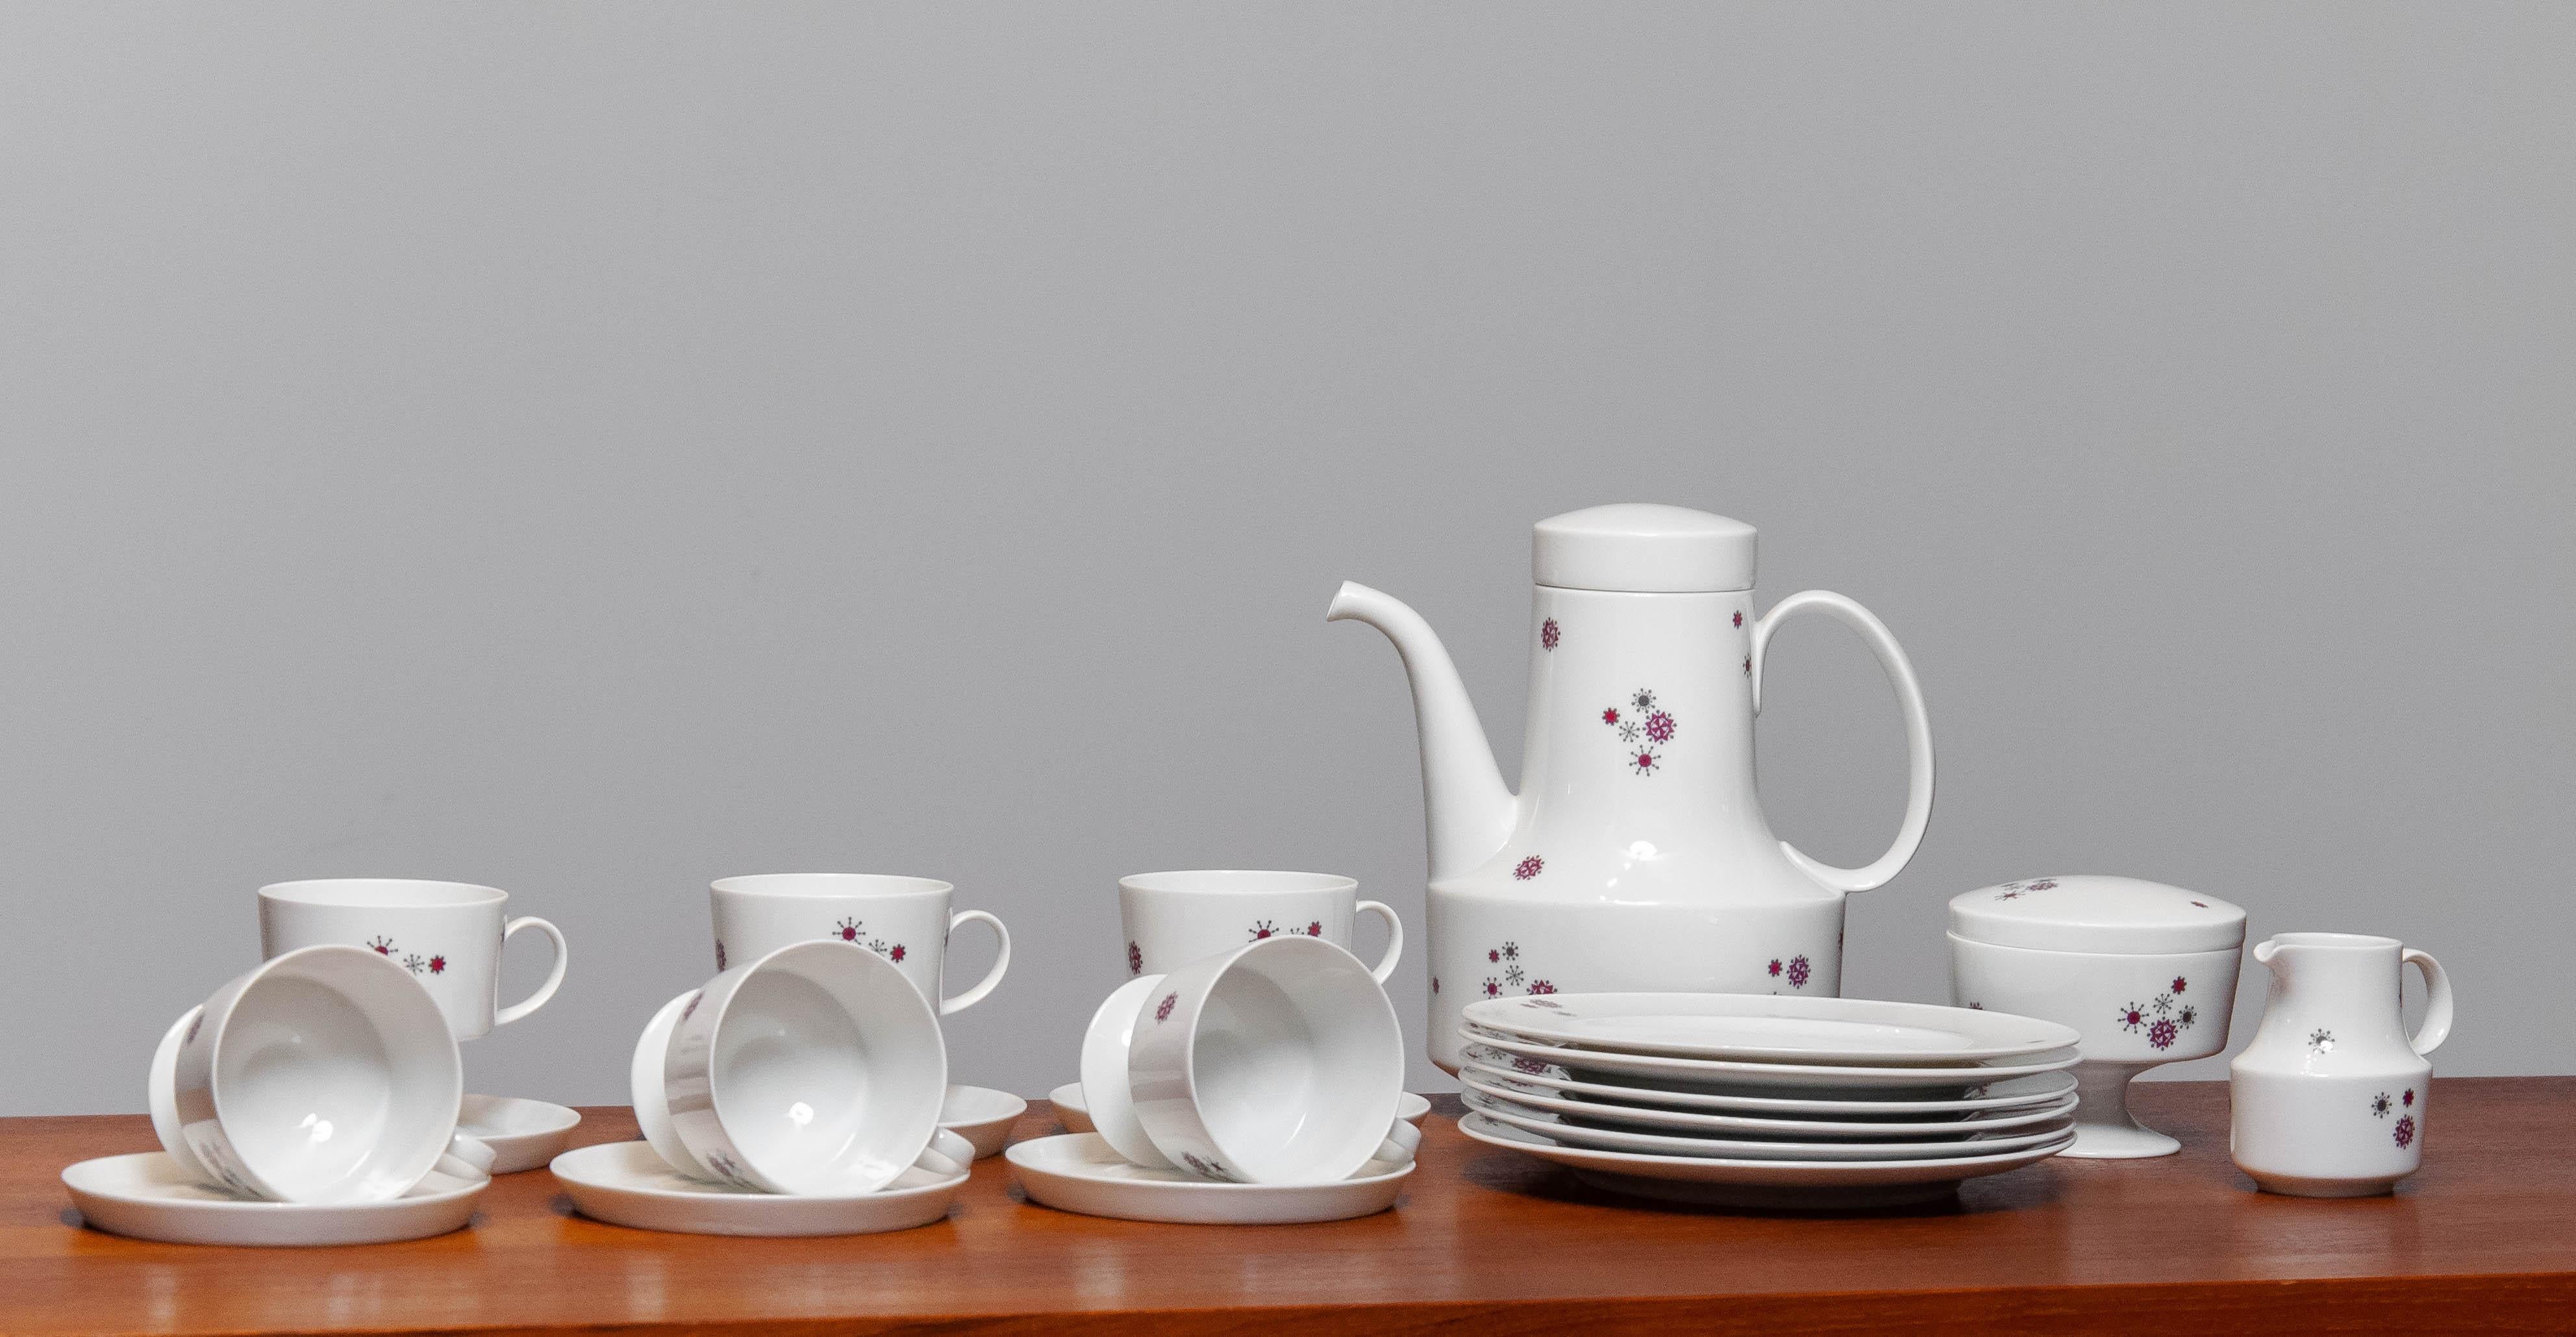 Modern 1960's Tea Set For Six Persons by Tapio Wirkkala And Ute Schröder For Rosenthal For Sale